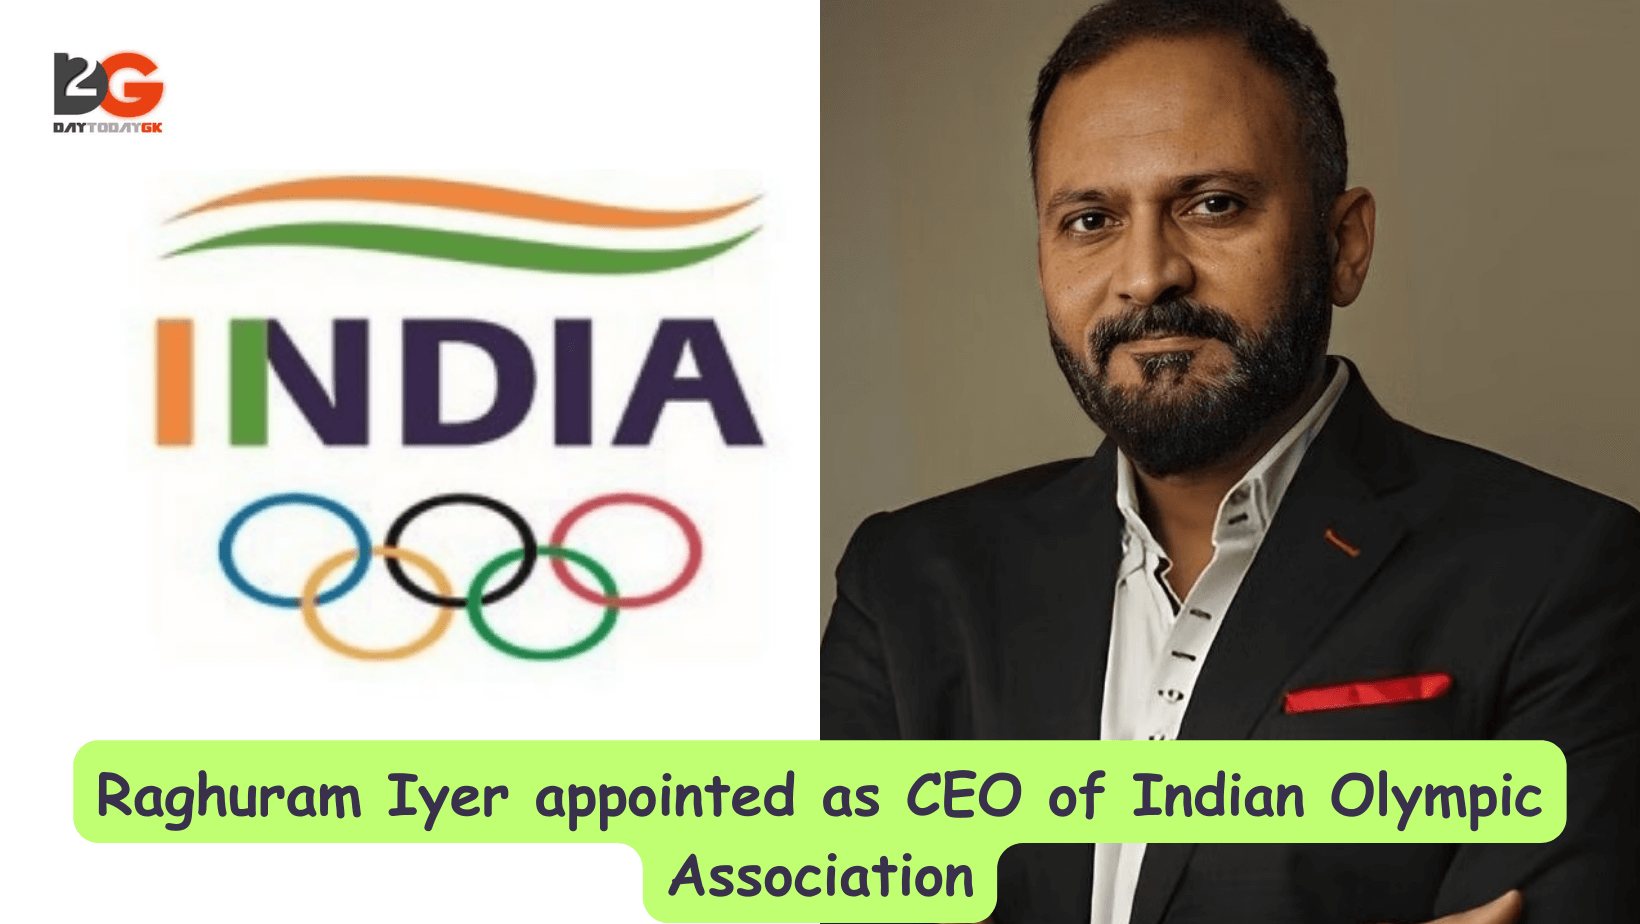 Raghuram Iyer appointed as CEO of Indian Olympic Association